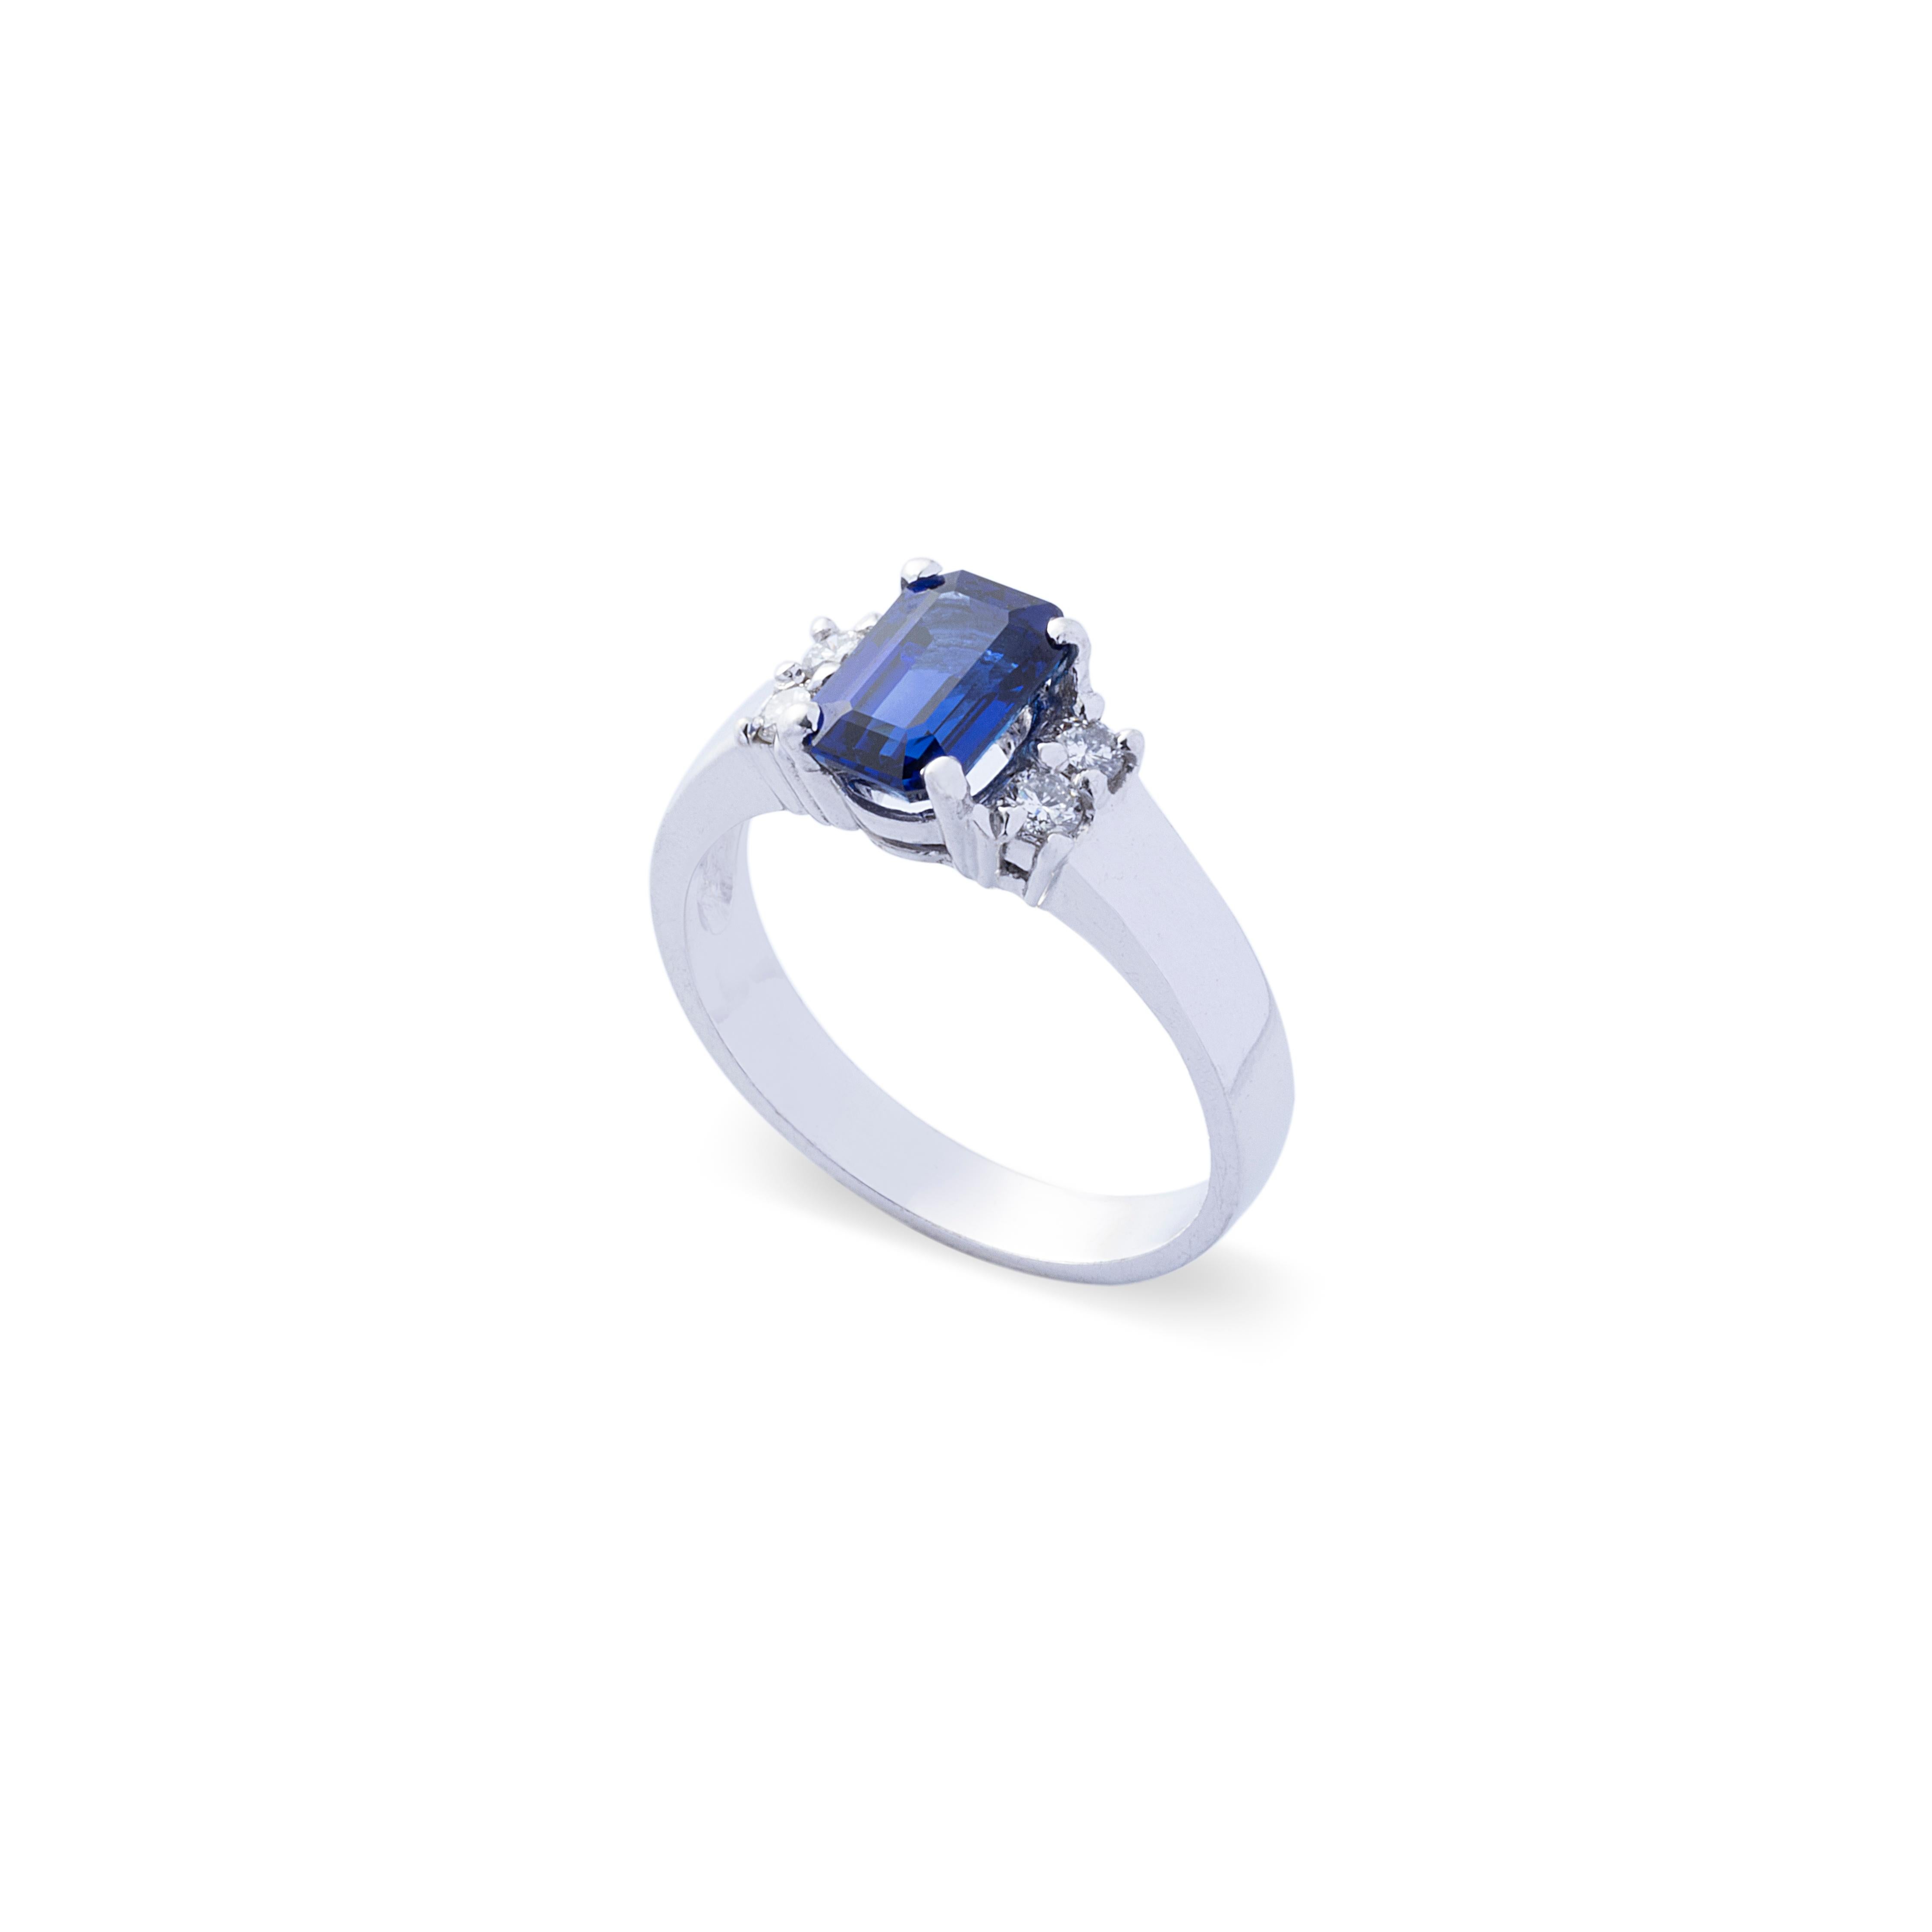 Estimate: $2,200-$3,500

This beautiful engagement ring boasts a very stunning cornflower blue sapphire! The sapphire is an emerald cut and is very clear and eye-clean with high saturation of blue color. There are 4 decent round brilliant diamonds